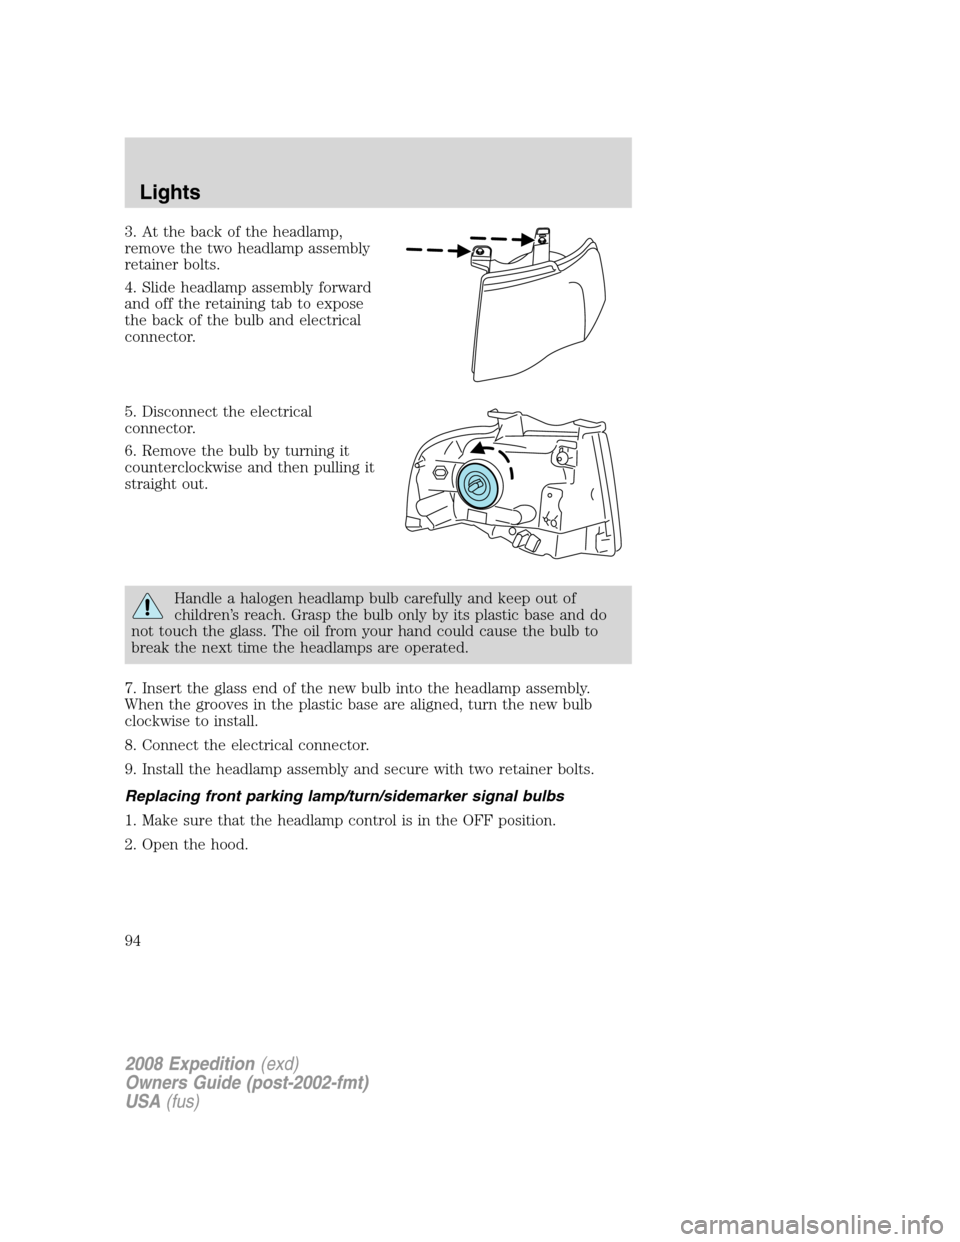 FORD EXPEDITION 2008 3.G Owners Manual 3. At the back of the headlamp,
remove the two headlamp assembly
retainer bolts.
4. Slide headlamp assembly forward
and off the retaining tab to expose
the back of the bulb and electrical
connector.
5